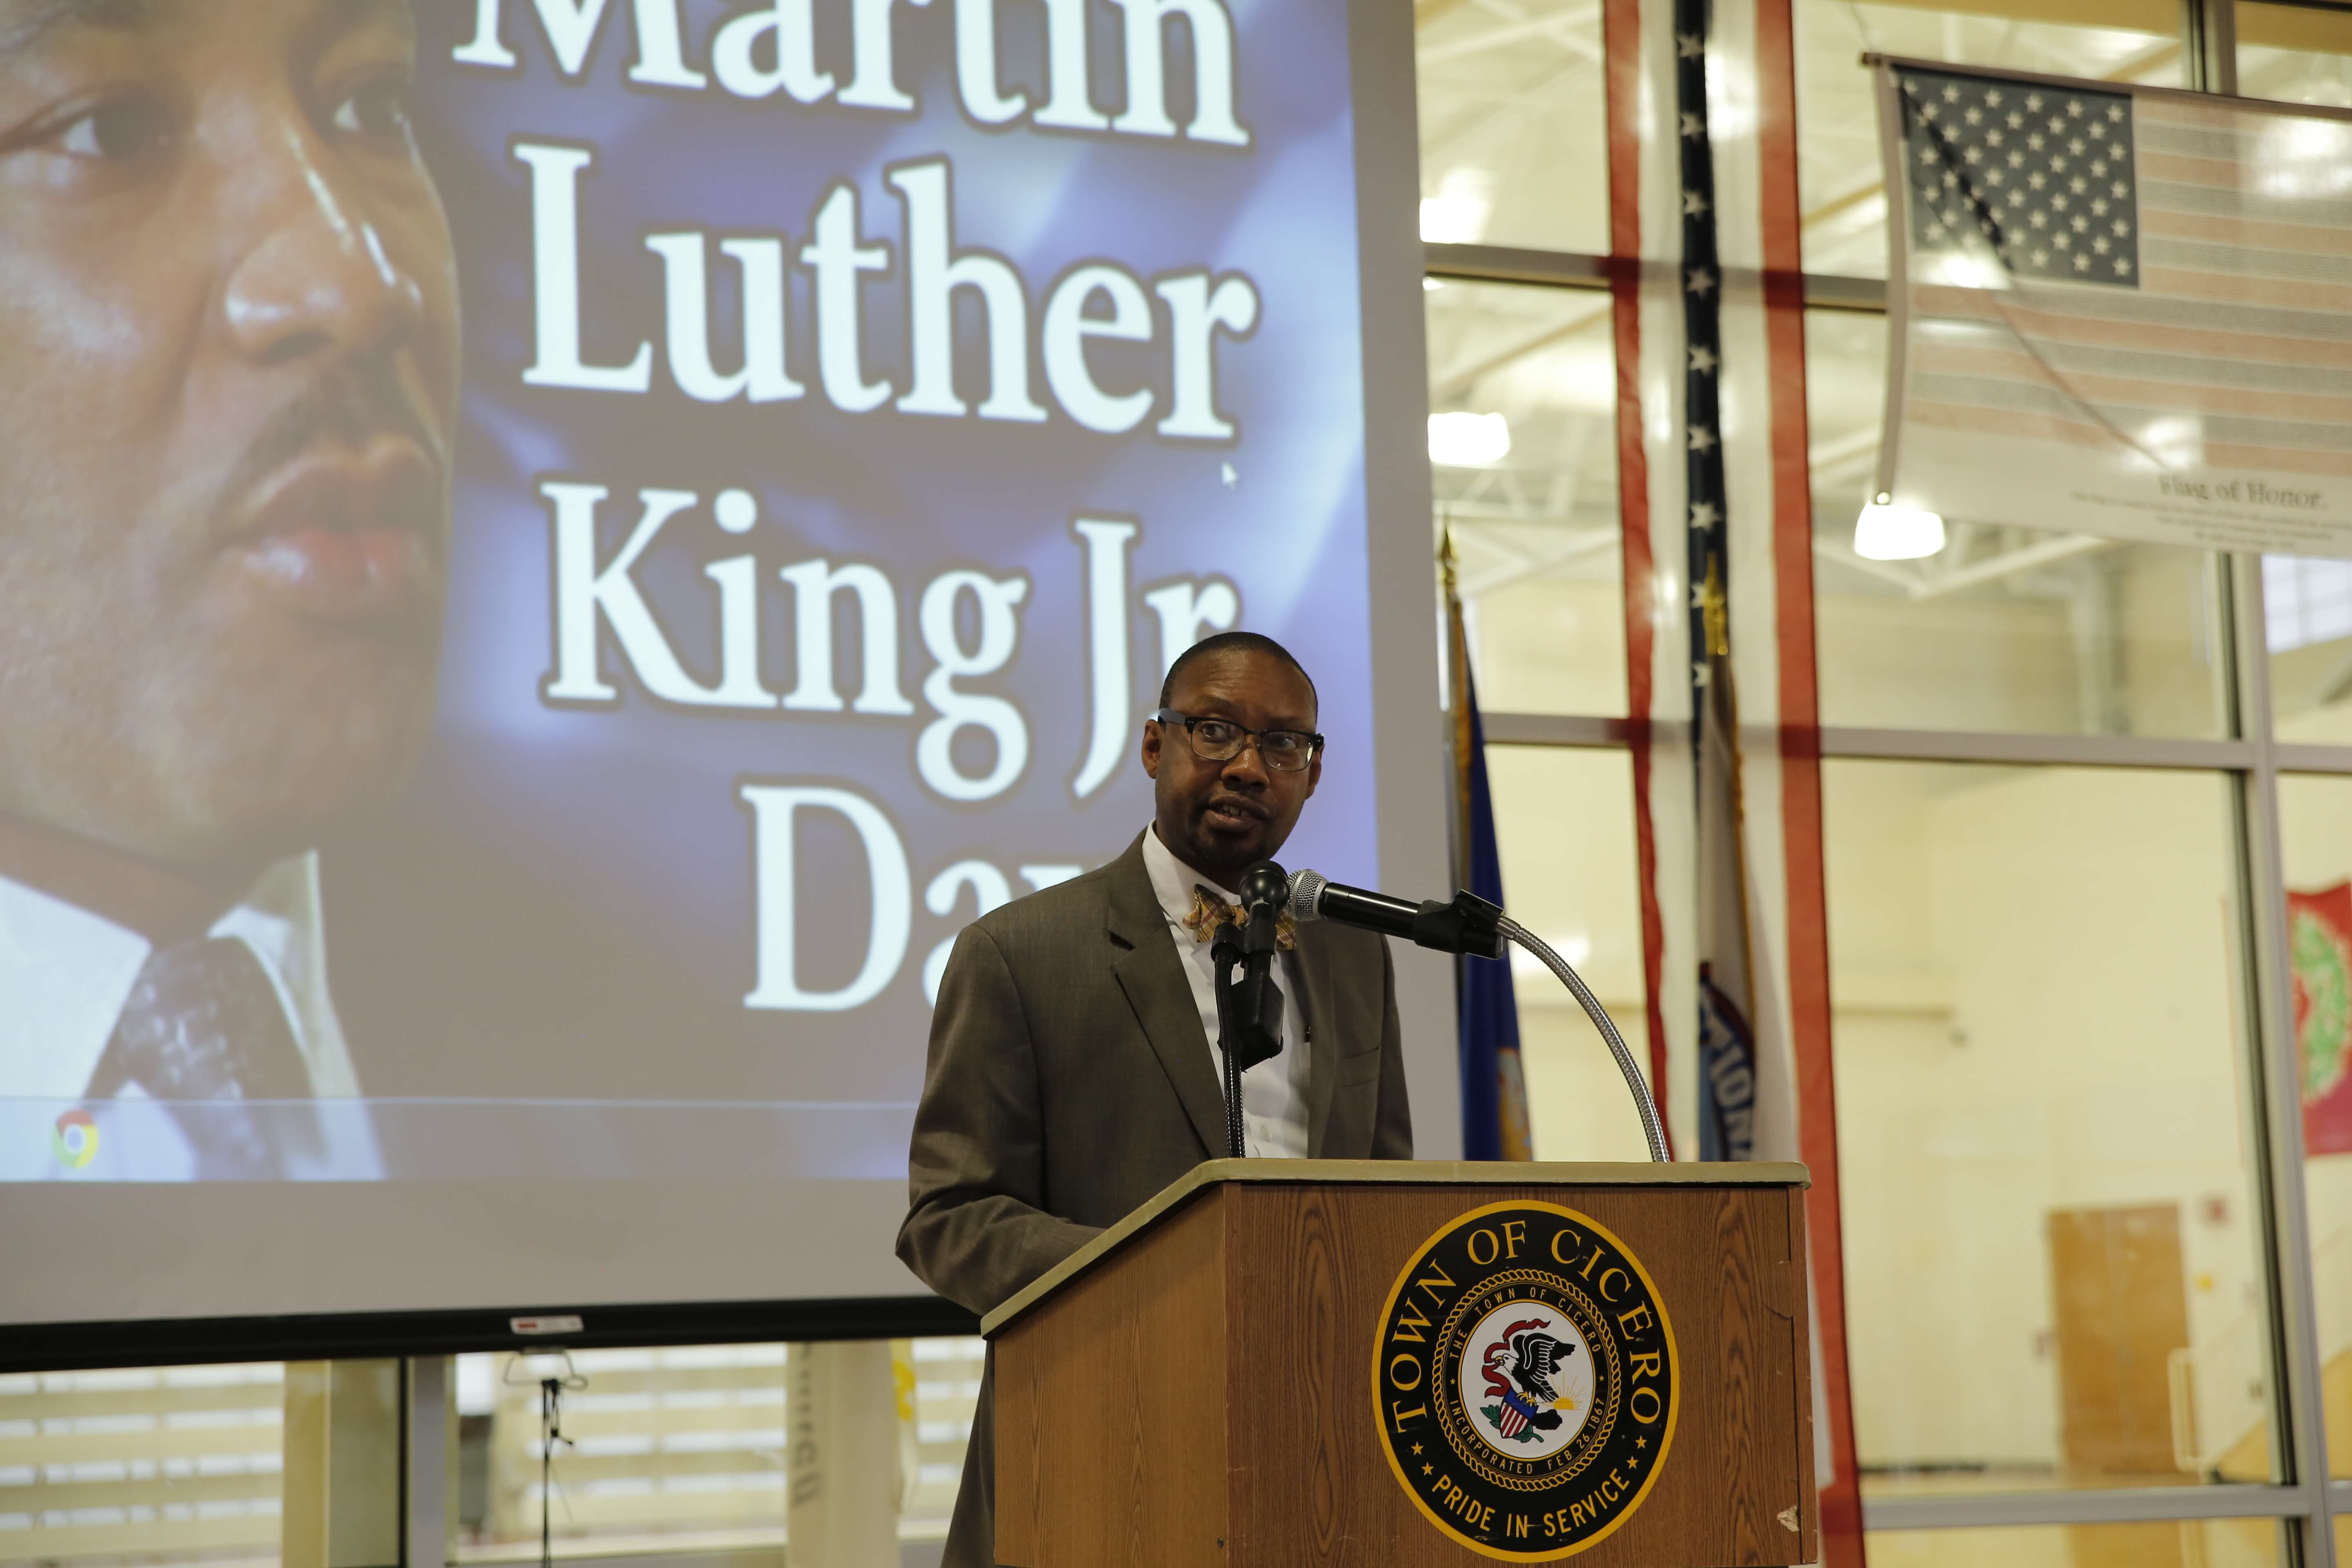 Kal Lwanga, executive assistant to Cicero Town President Larry Dominick, served as the emcee of Cicero's 10th annual commemoration celebrating the life of the Rev. Dr. Martin Luther King Jr., held in Cicero on Thursday Jan. 11, 2018. Photo courtesy of the Town of Cicero.